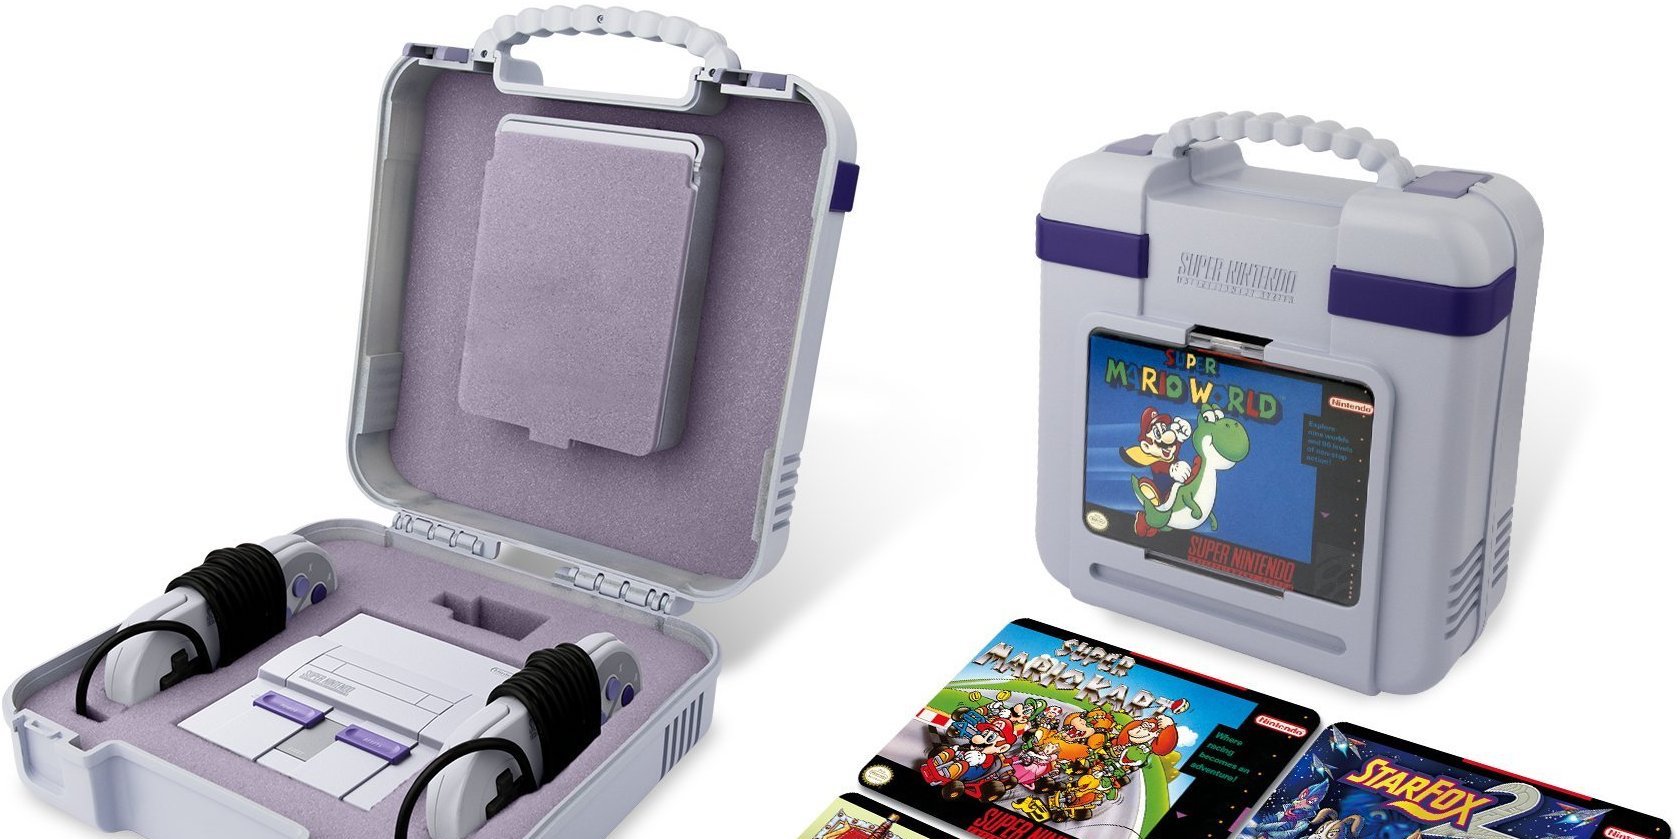 new Super Nintendo Edition Carrying Case, now